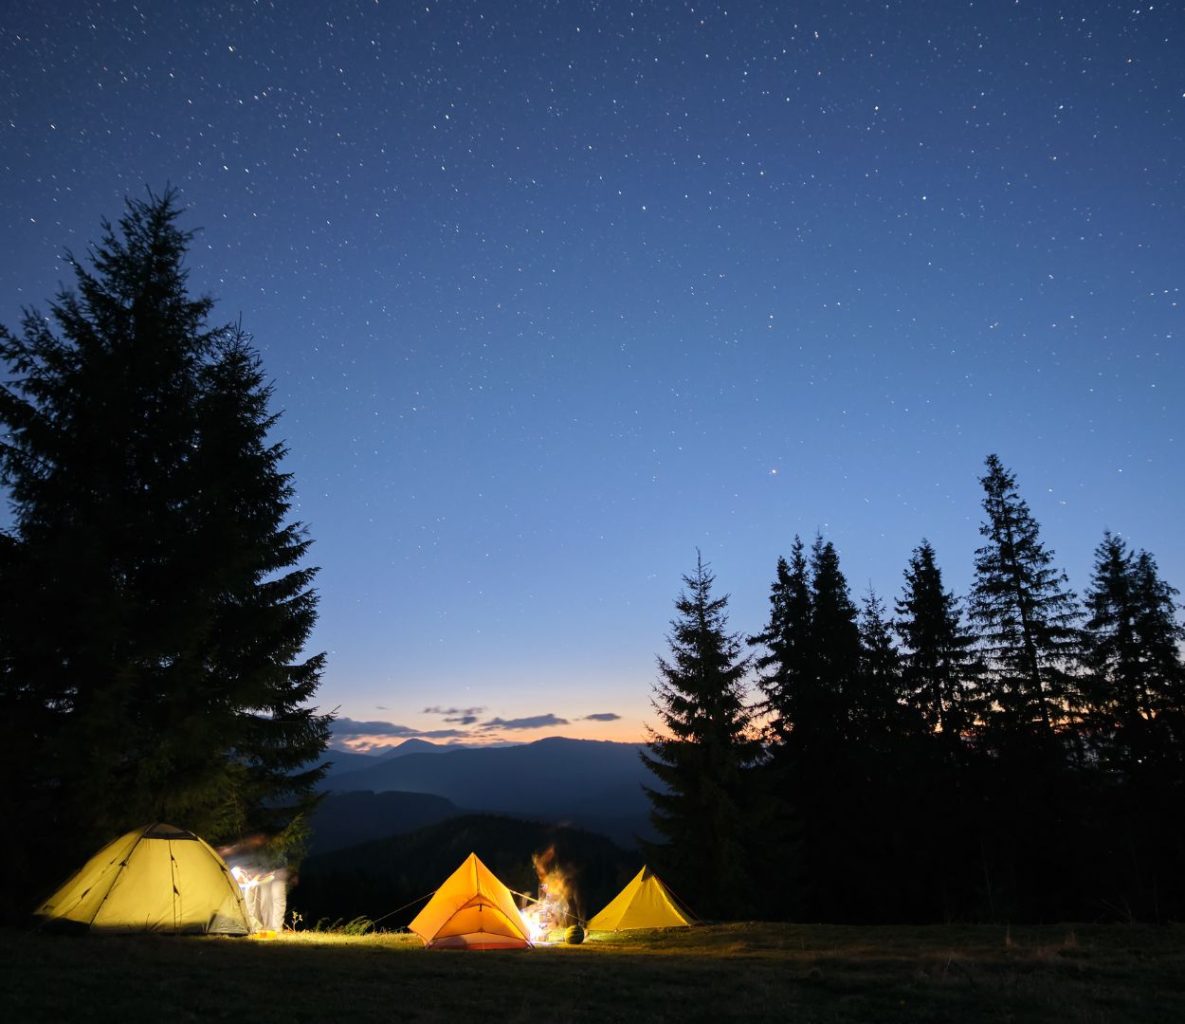 10 Important Tips for Camping in U.S. National Parks